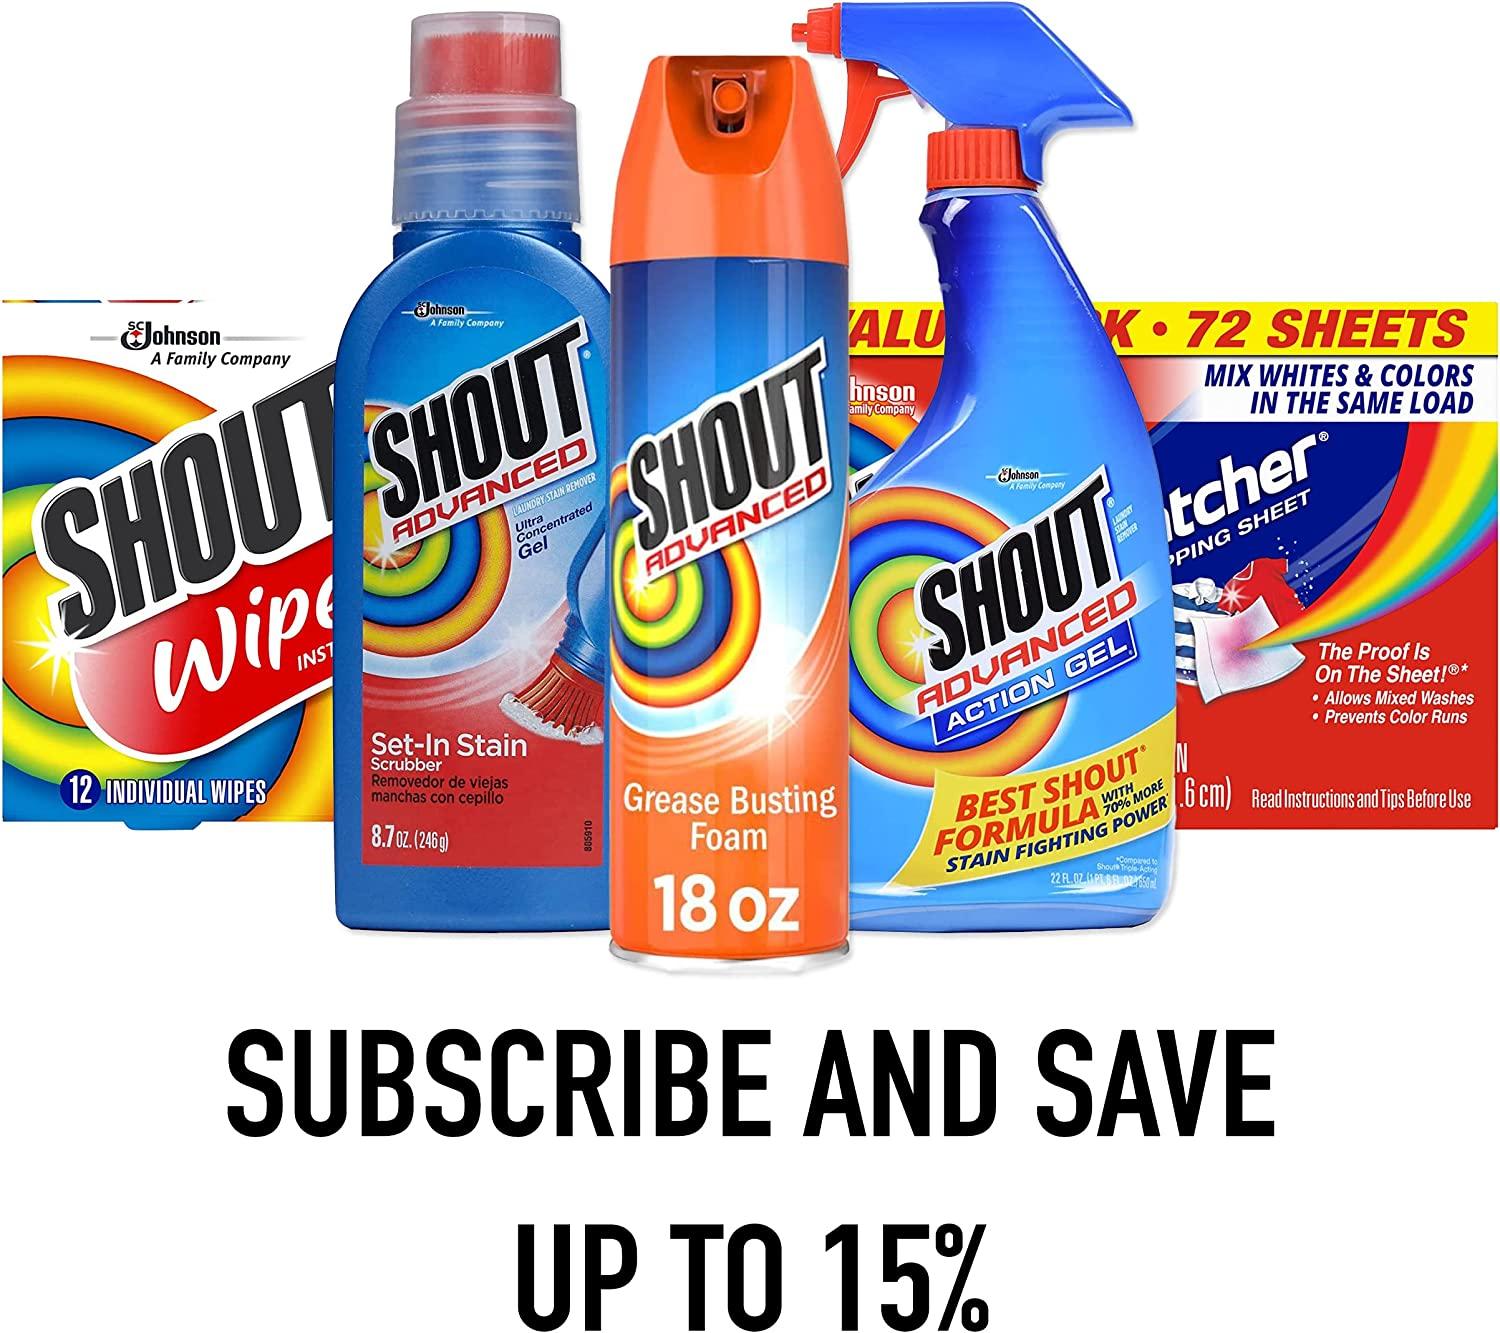 Shout Advanced Spray and Wash Laundry Stain Remover Gel, Best Shout  Formula, 22 oz - Pack of 3 22 Fl Oz (Pack of 3)